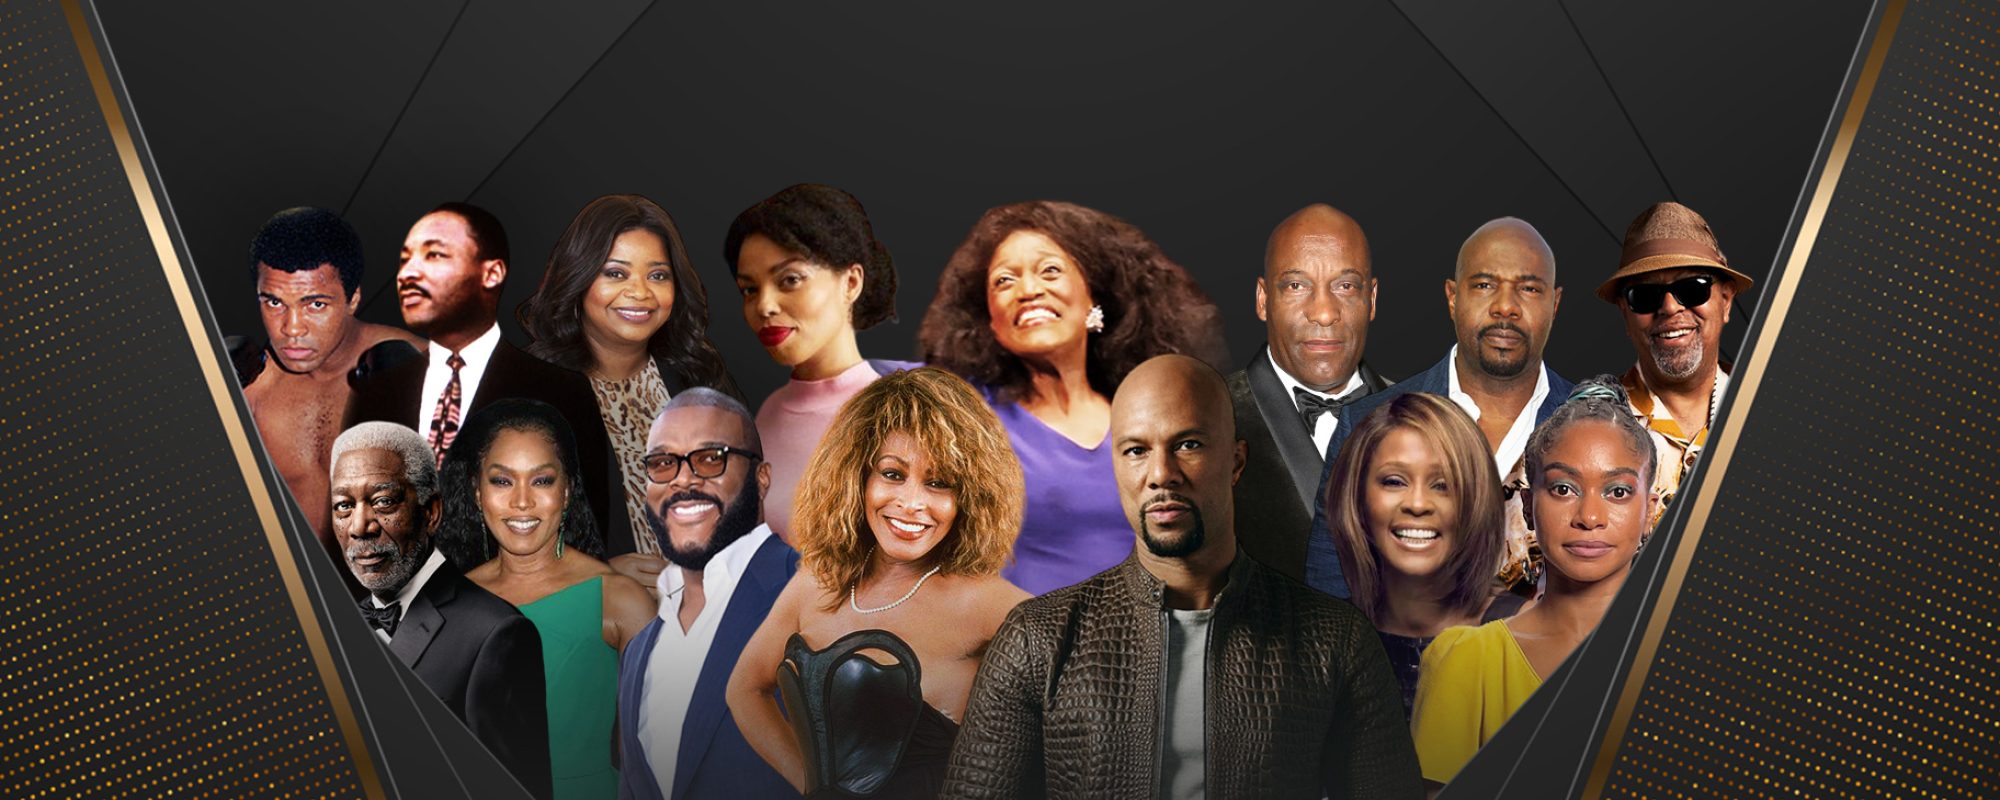 OVATION TV CELEBRATES BLACK HISTORY MONTH 2023 WITH WEEK-DAY MORNING LINEAR PROGRAMMING, INCLUDING NETWORK PREMIERES, AND A CURATED ON-DEMAND LINEUP OF FILMS, DOCS, & SERIES